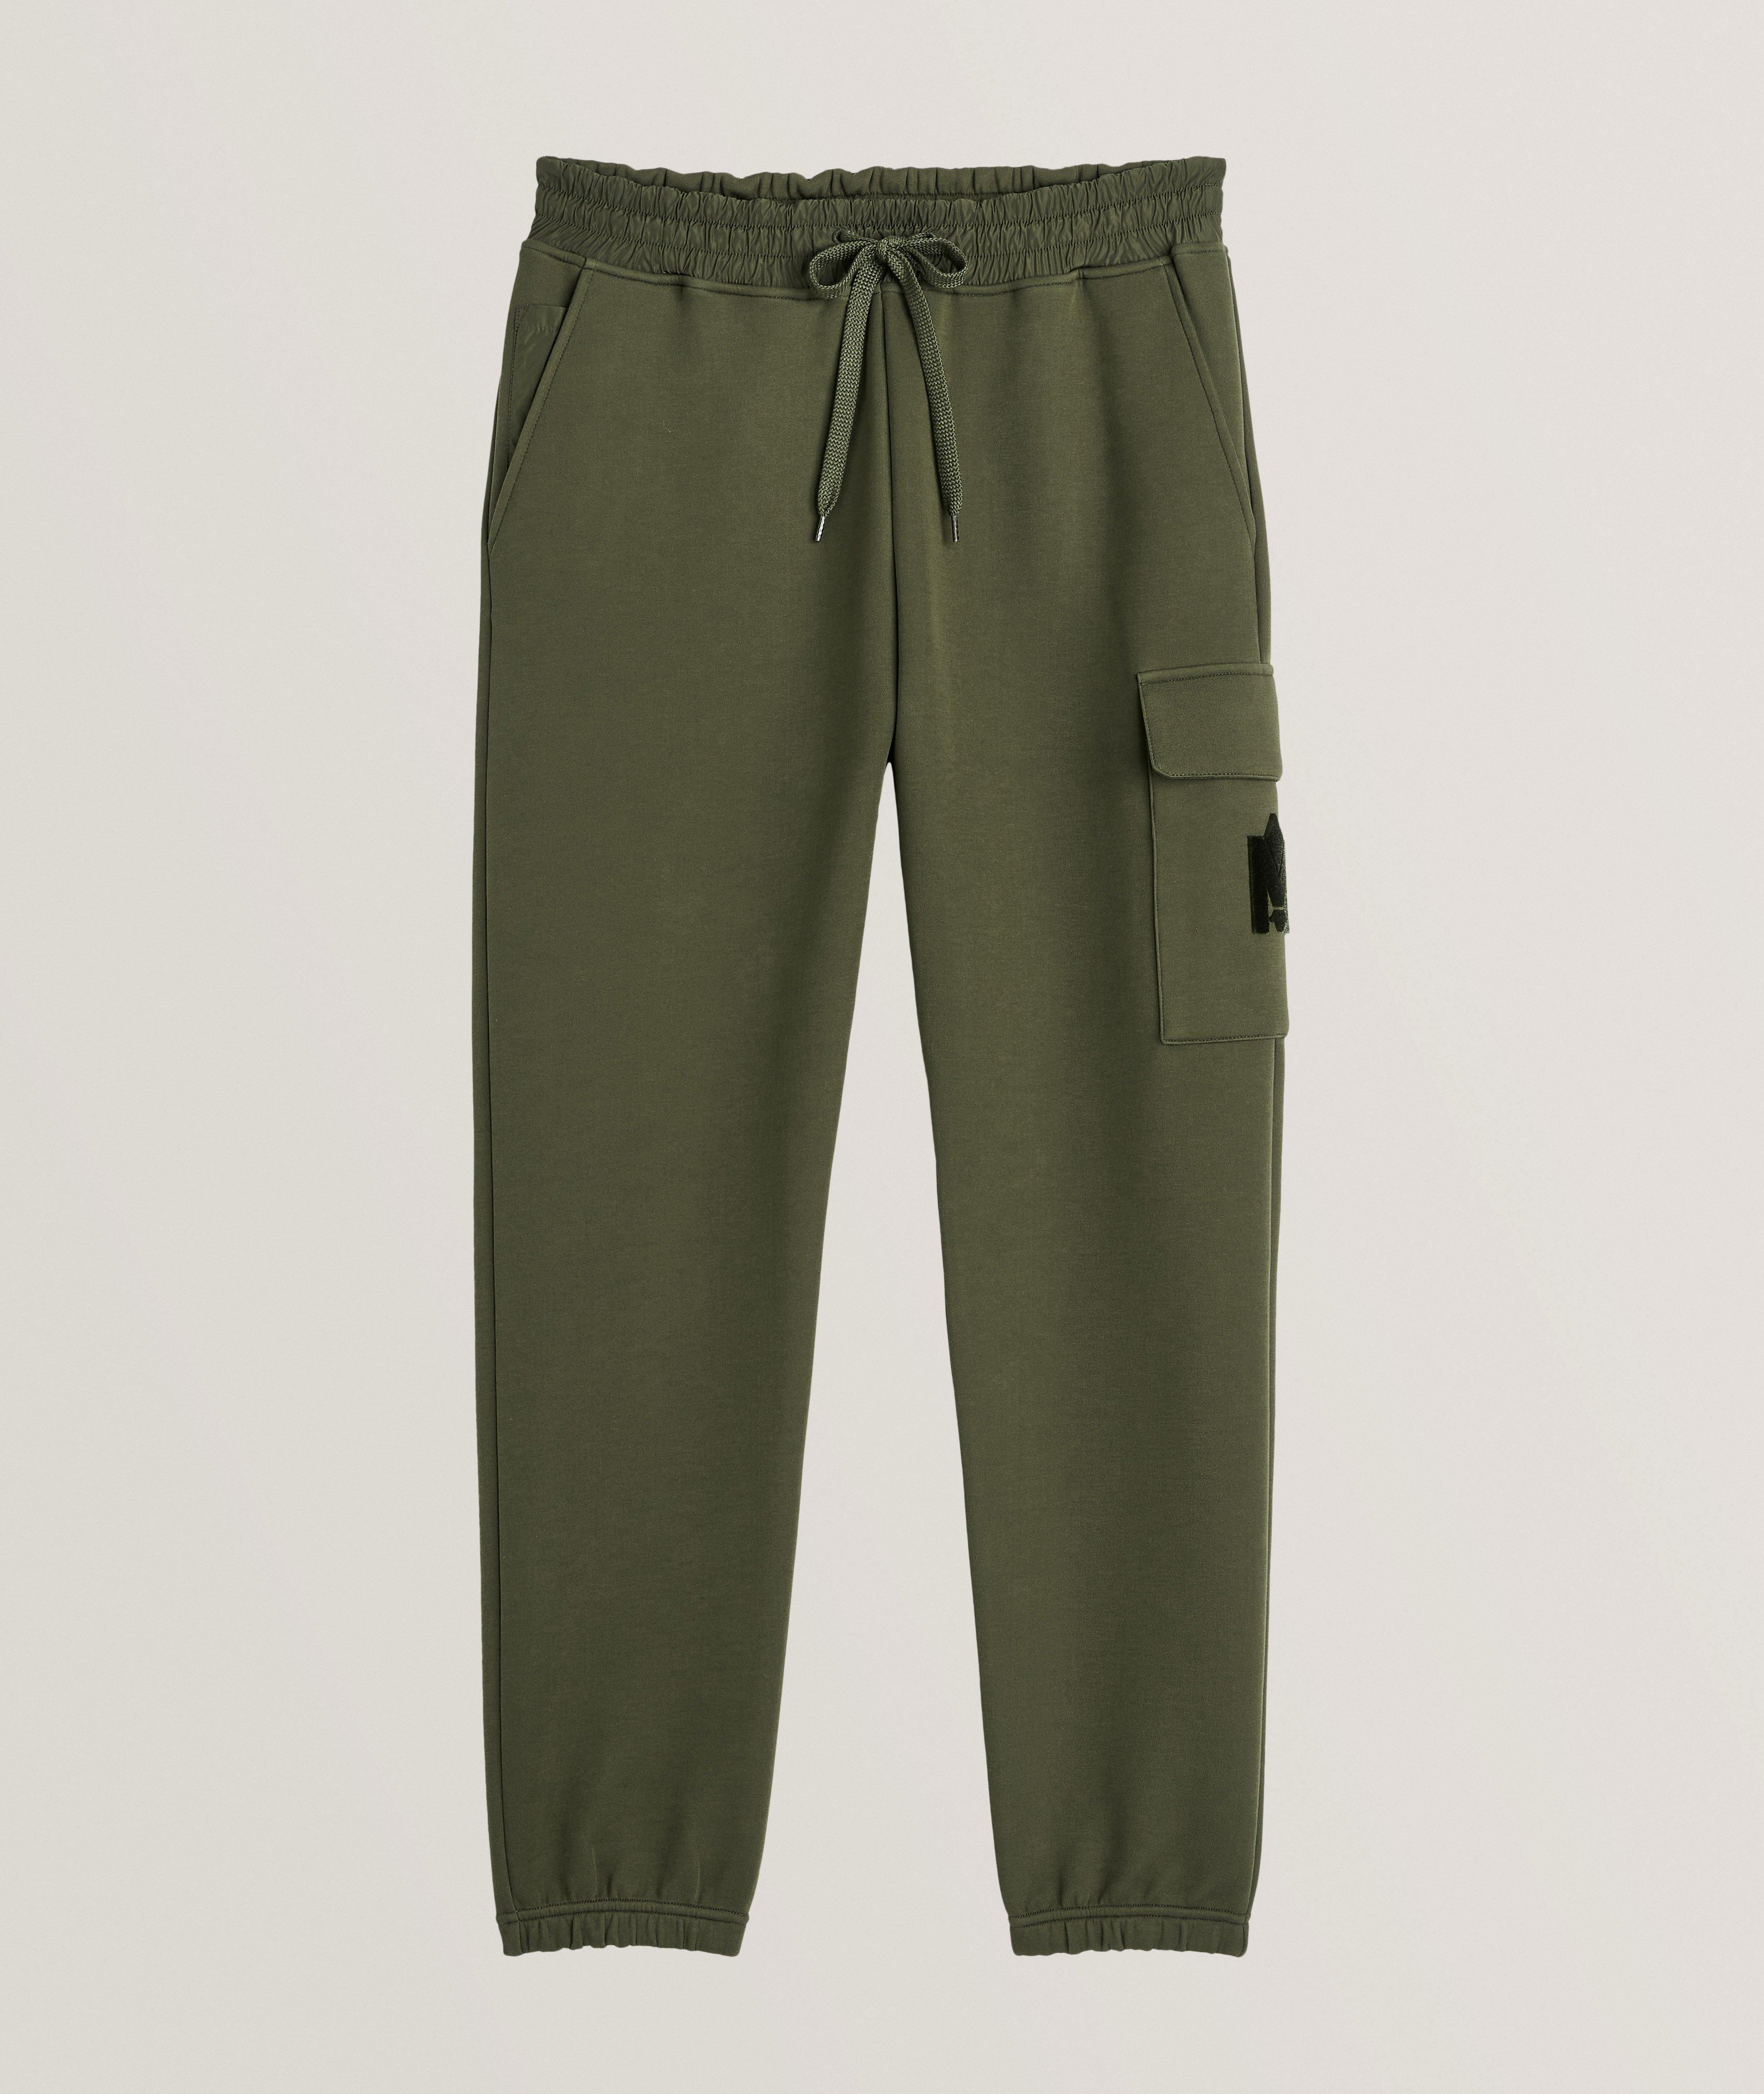 Marvin Jersey Cotton Track Pants image 0